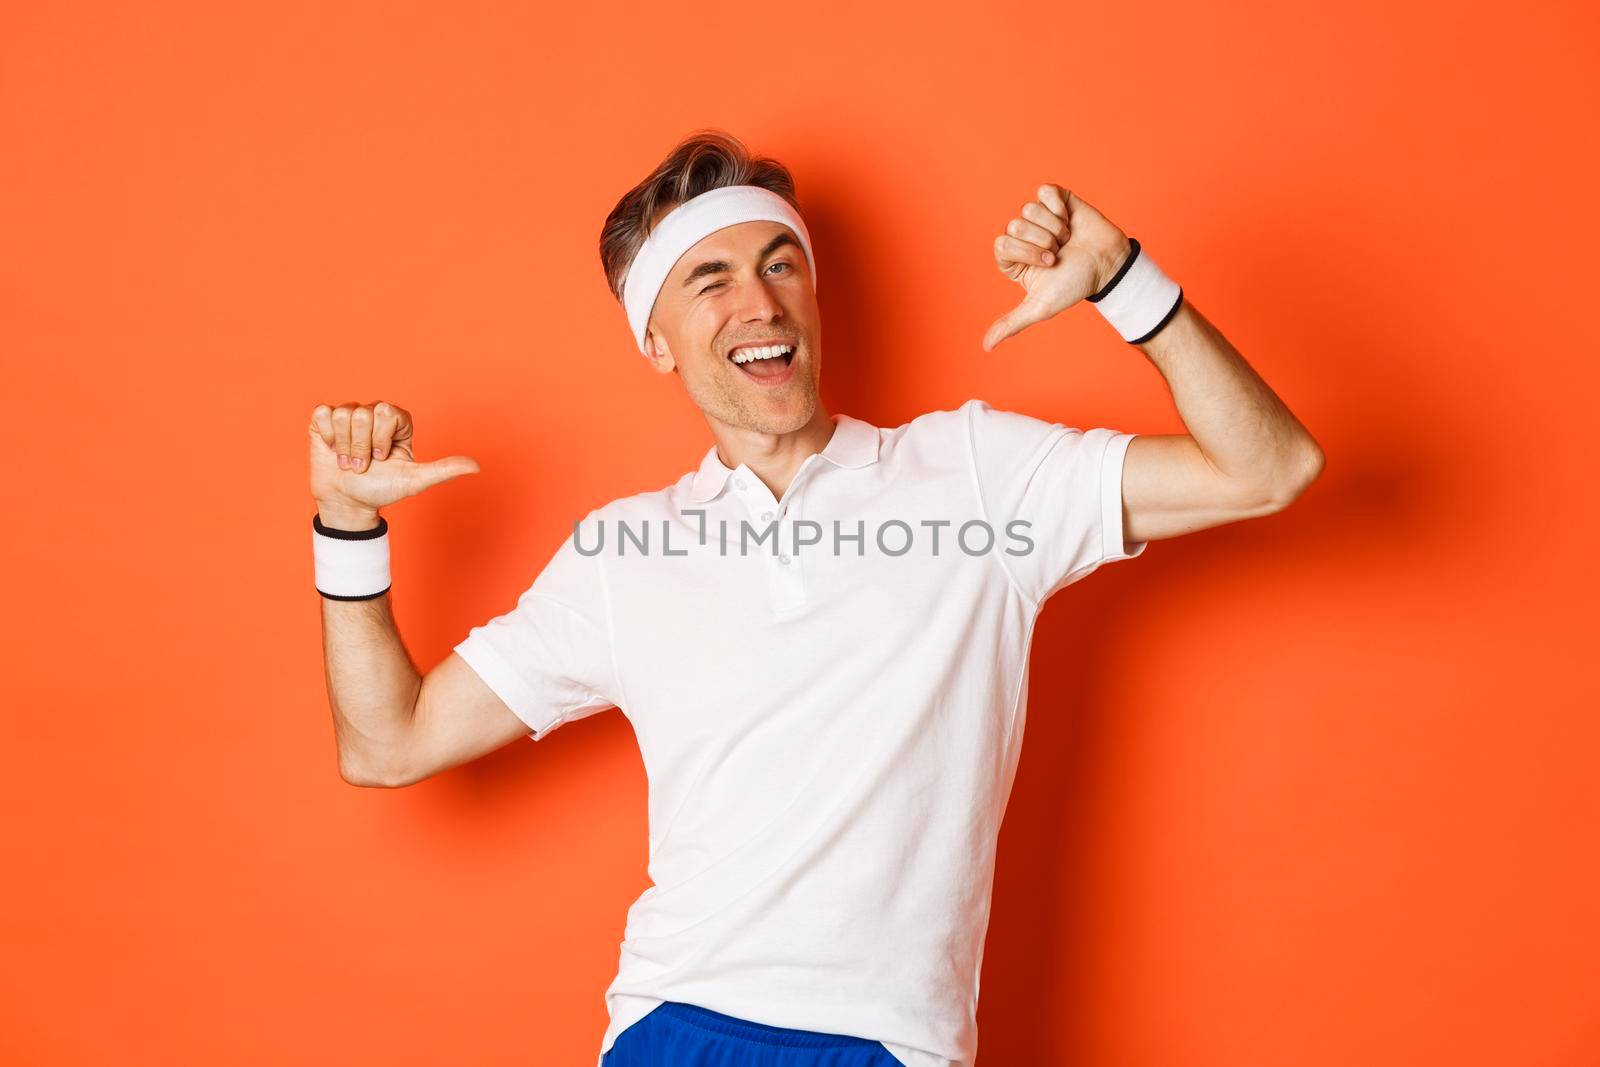 Concept of sport, fitness and lifestyle. Image of confident middle-aged man pointing at himself, bragging about achievement, wearing clothes for workout, standing over orange background.